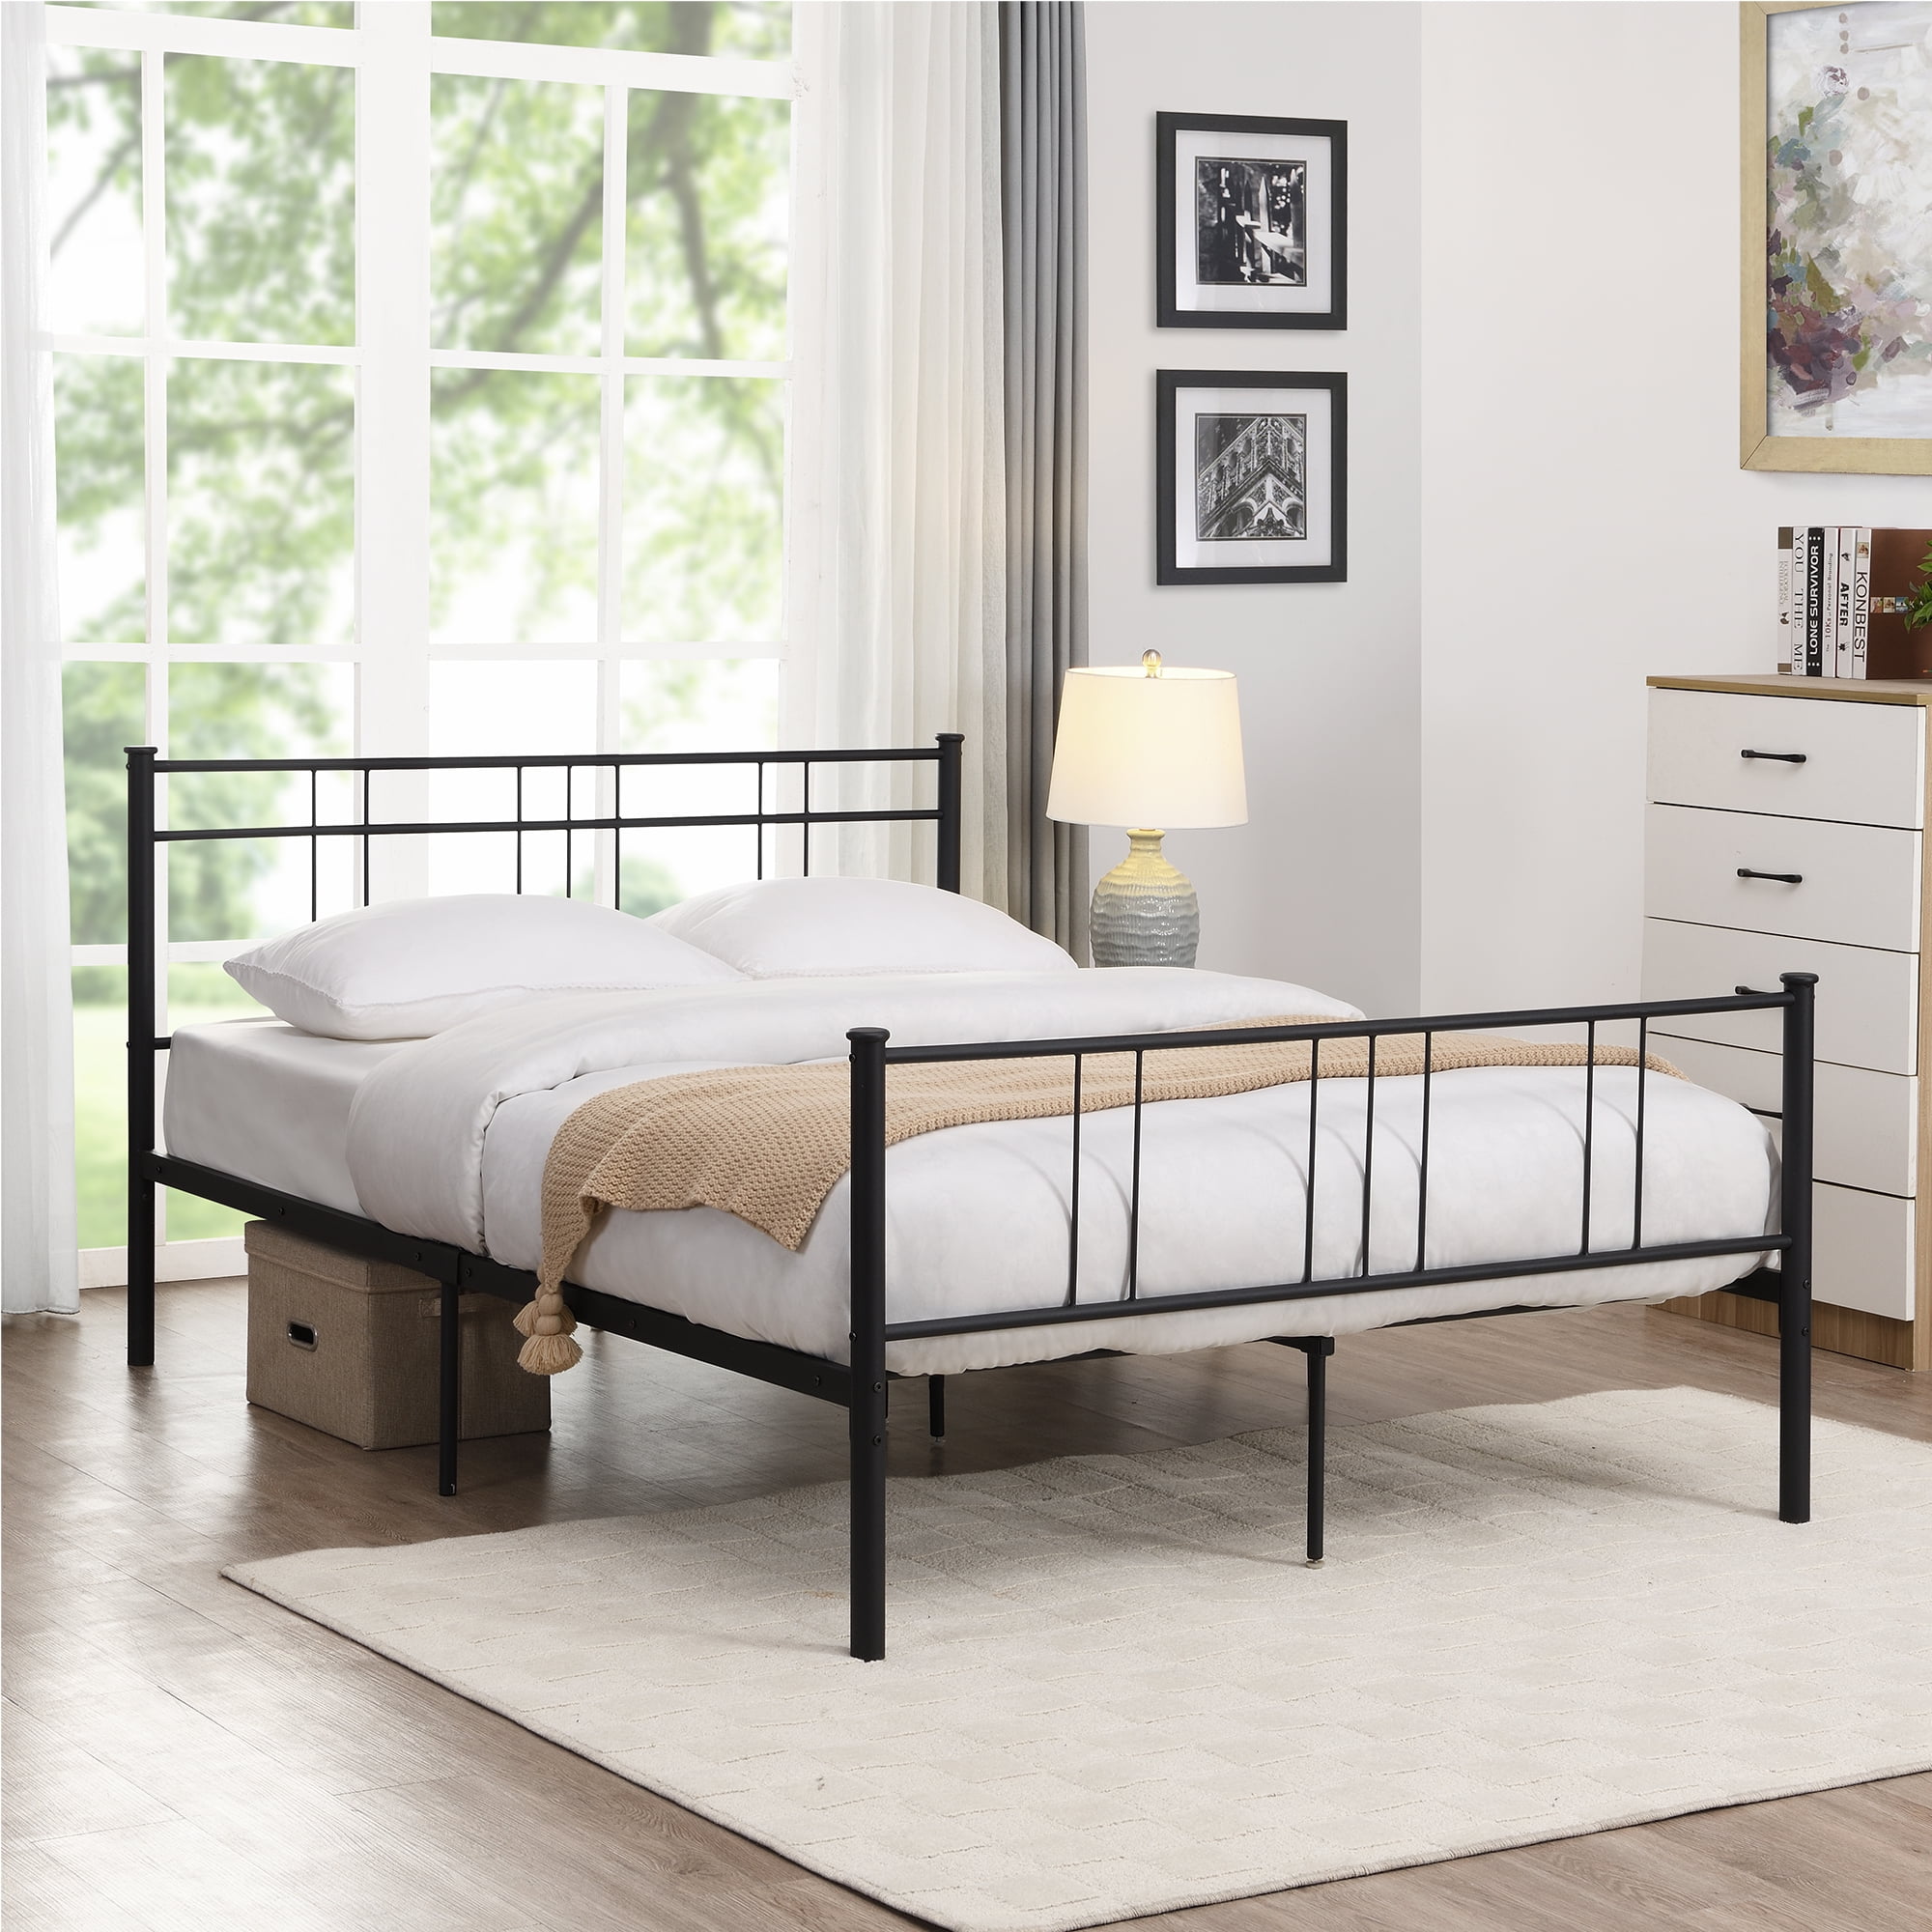 Metal Bed Frame With Headboard, Easy To Assemble Bed Frame